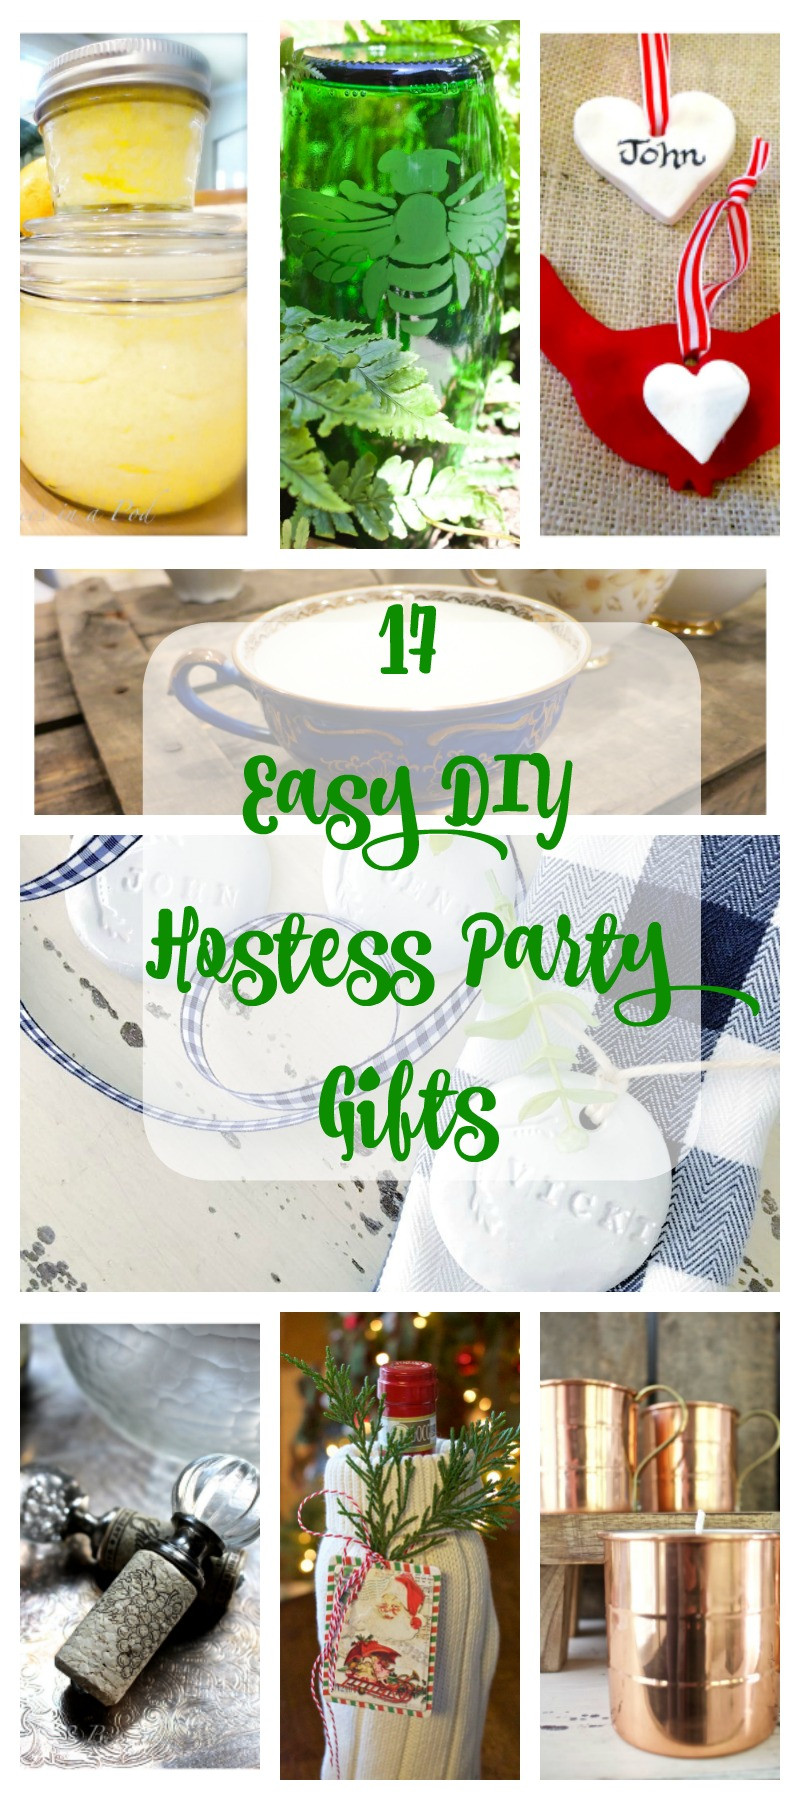 Hostess Gift Ideas For Engagement Party
 17 Ideas for Easy DIY Holiday Hostess Gifts 2 Bees in a Pod